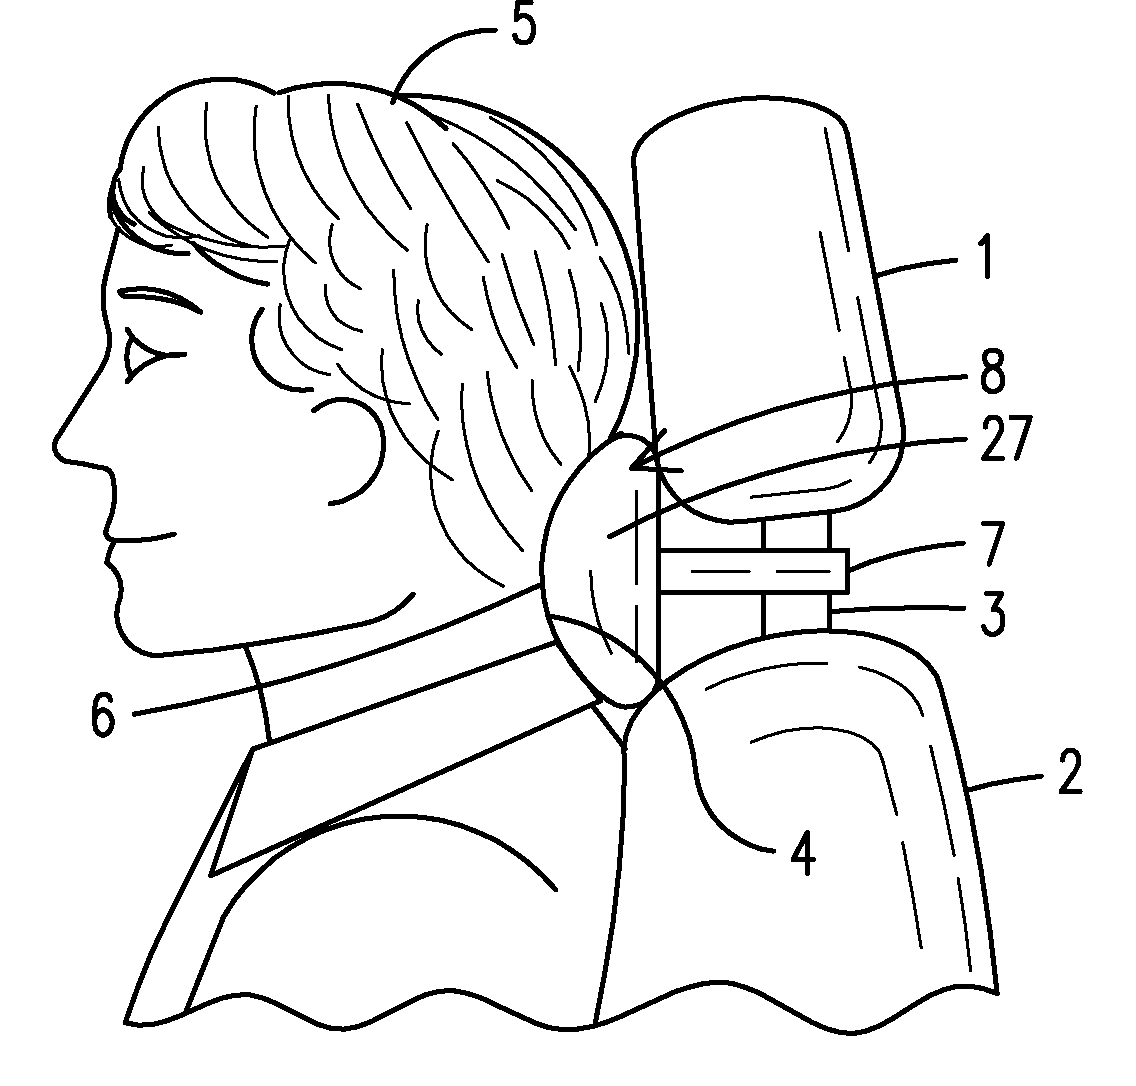 Vehicle seat neck protection device